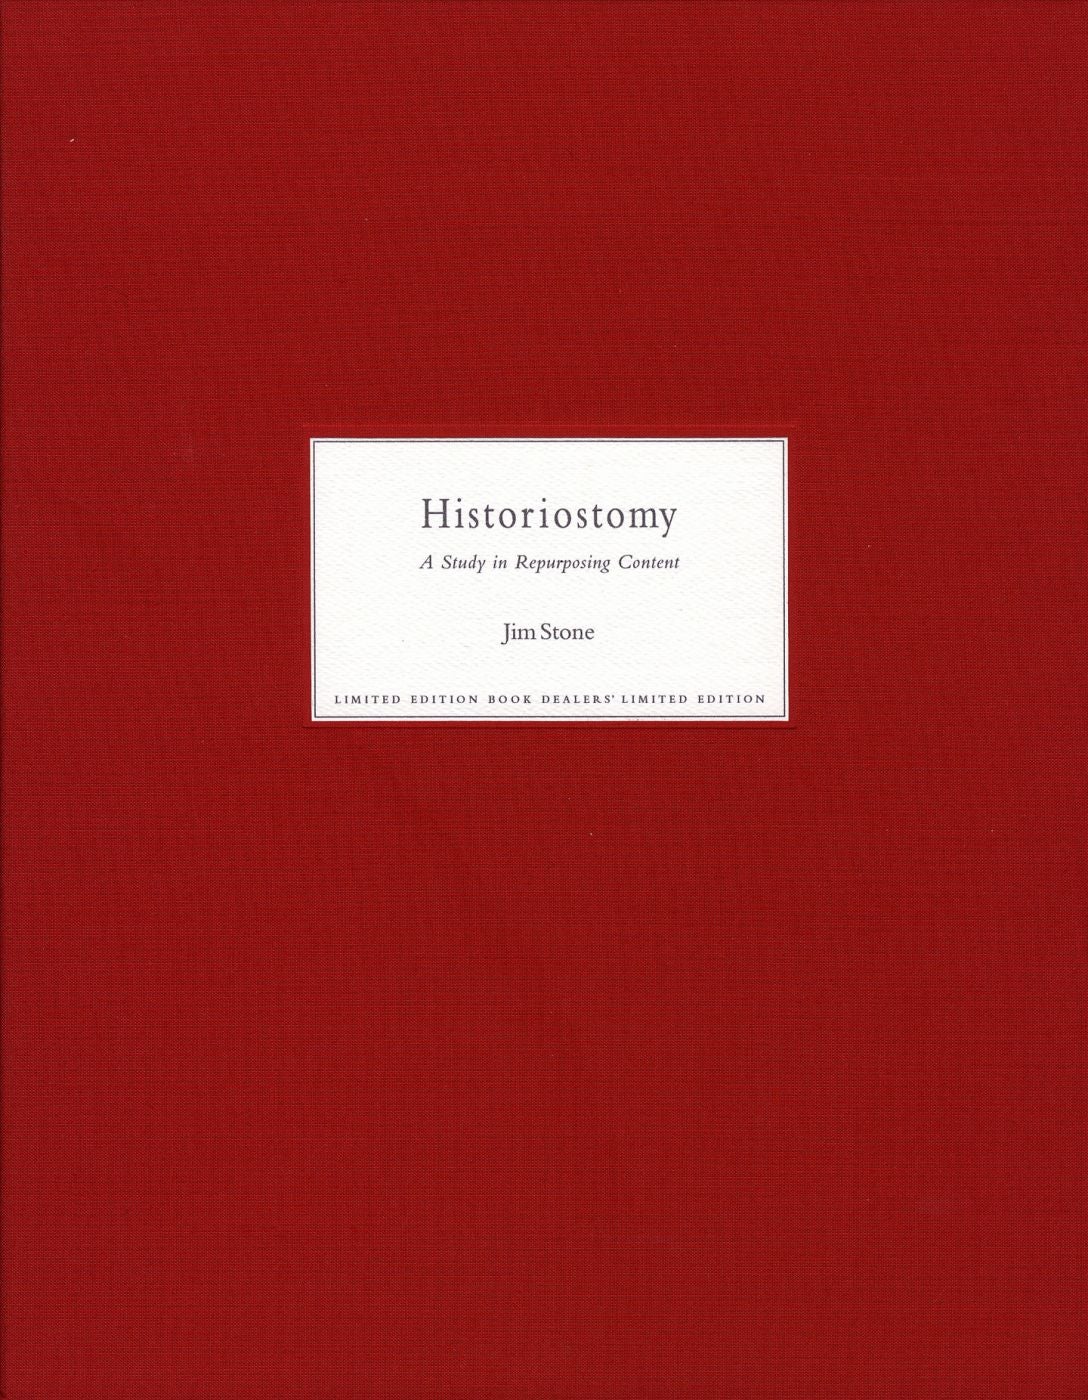 Jim Stone: Historiostomy: A Study in Repurposing Content, Limited Edition [SIGNED]